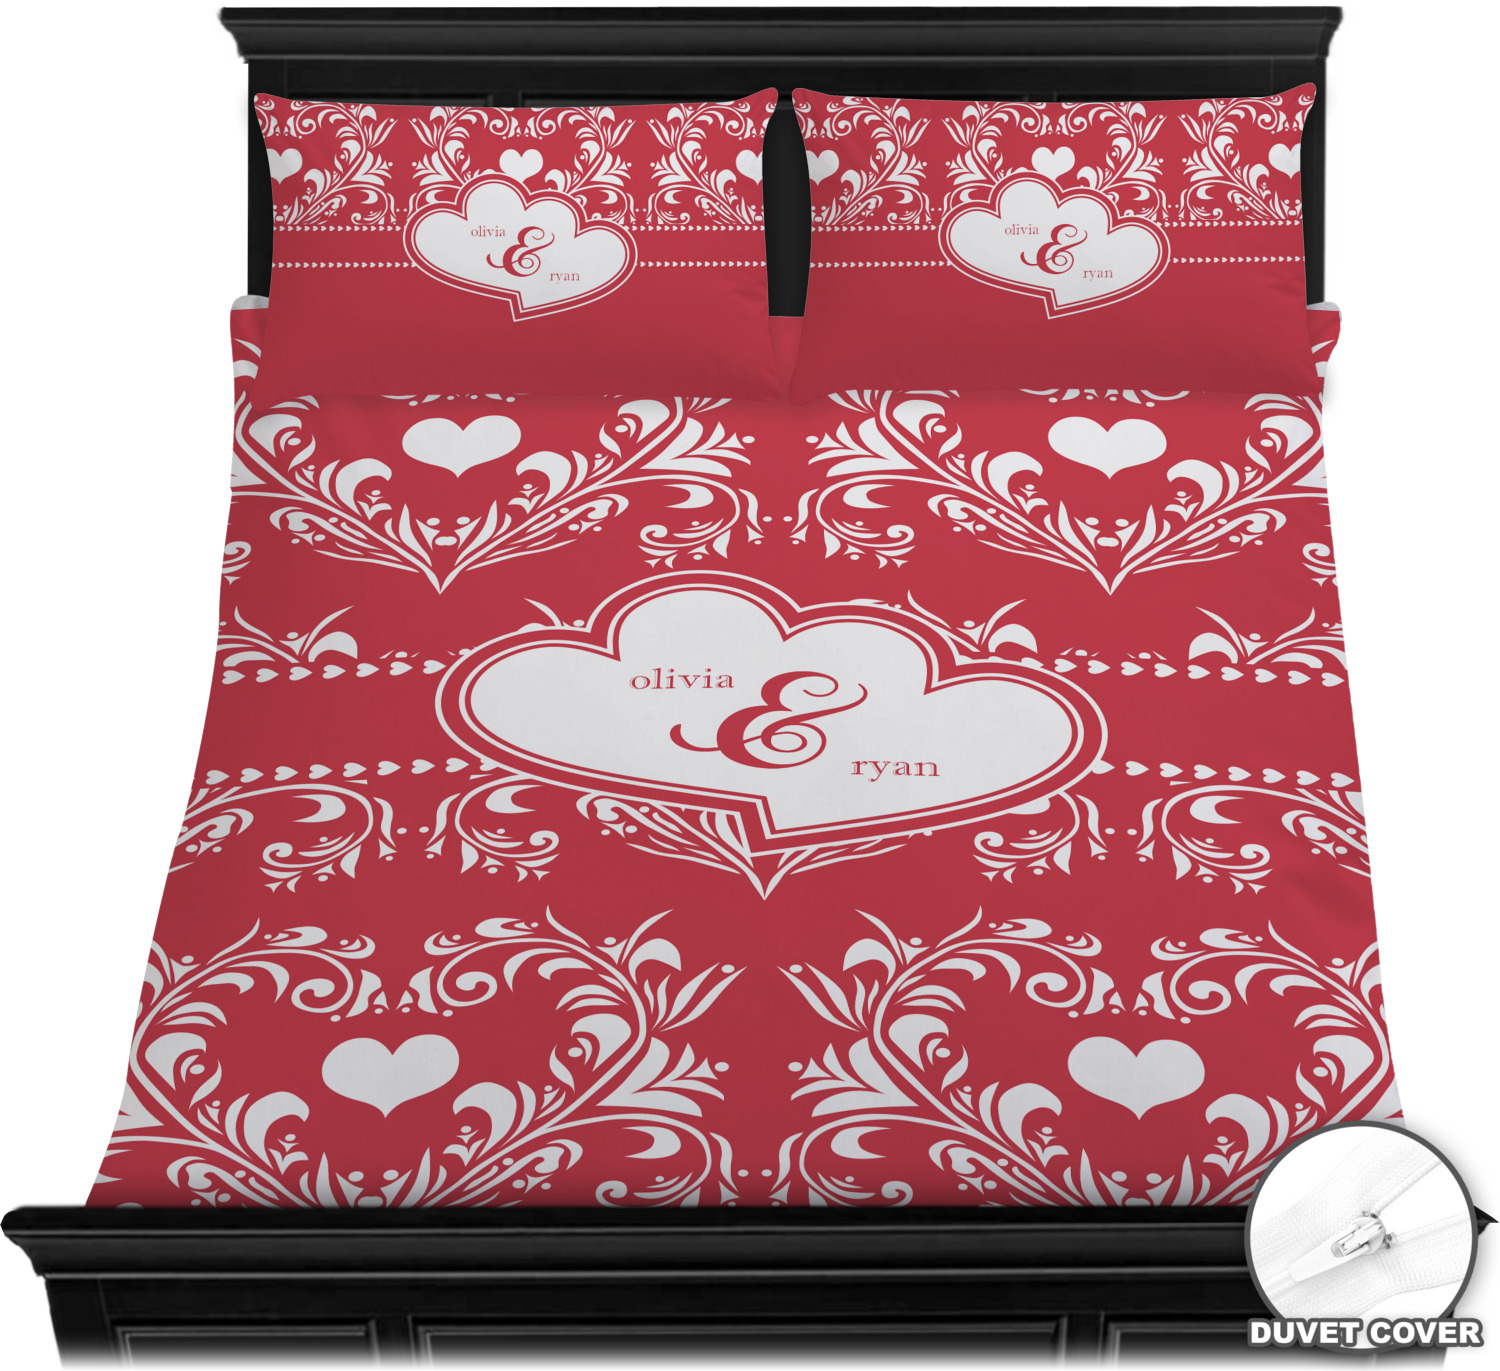 Heart Damask Duvet Covers Personalized Youcustomizeit